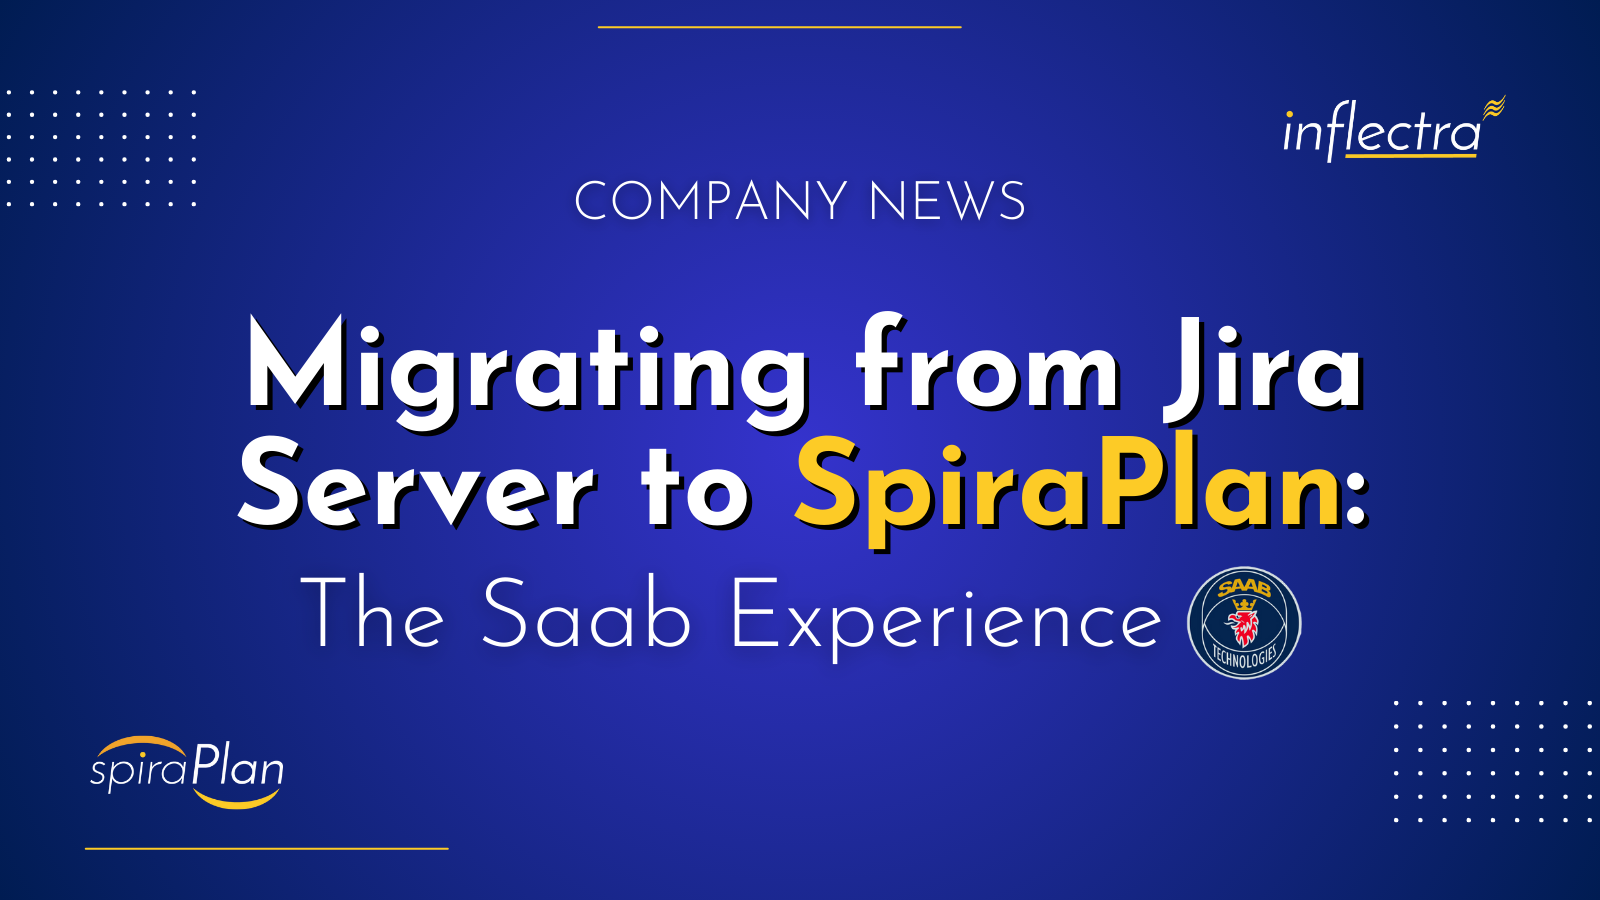 inflectra-company-news-migrating-from-jira-server-to-spiraplan-the-saab-experience-image